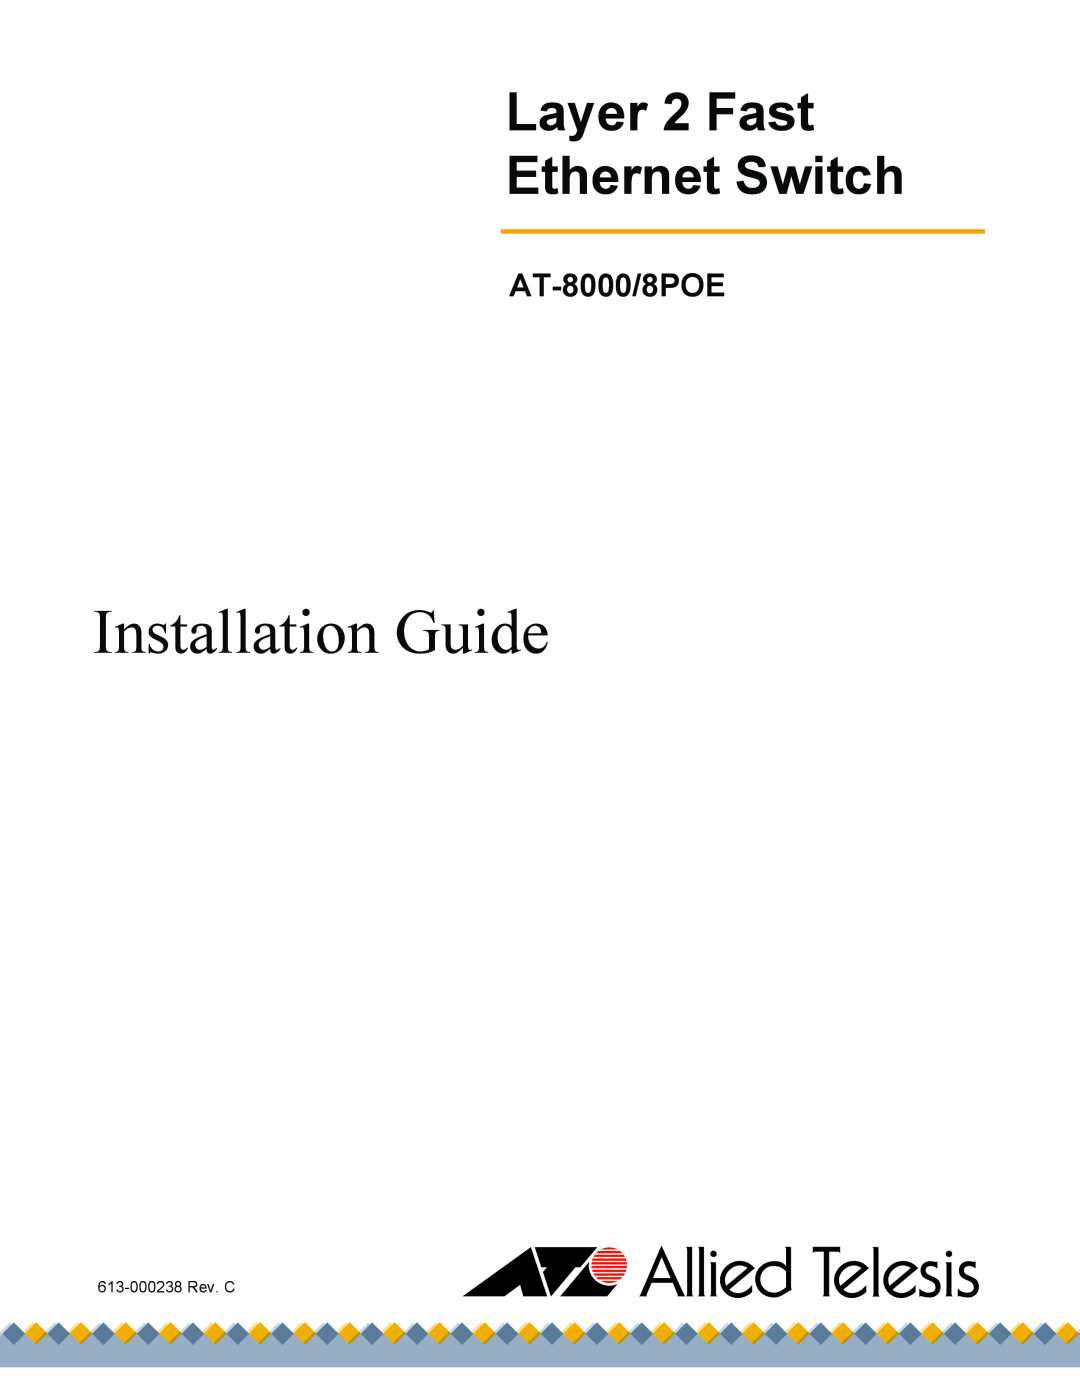 Allied Telesis manual Installation Guide, Layer 2 Fast Ethernet Switch, AT-8000/8POE 